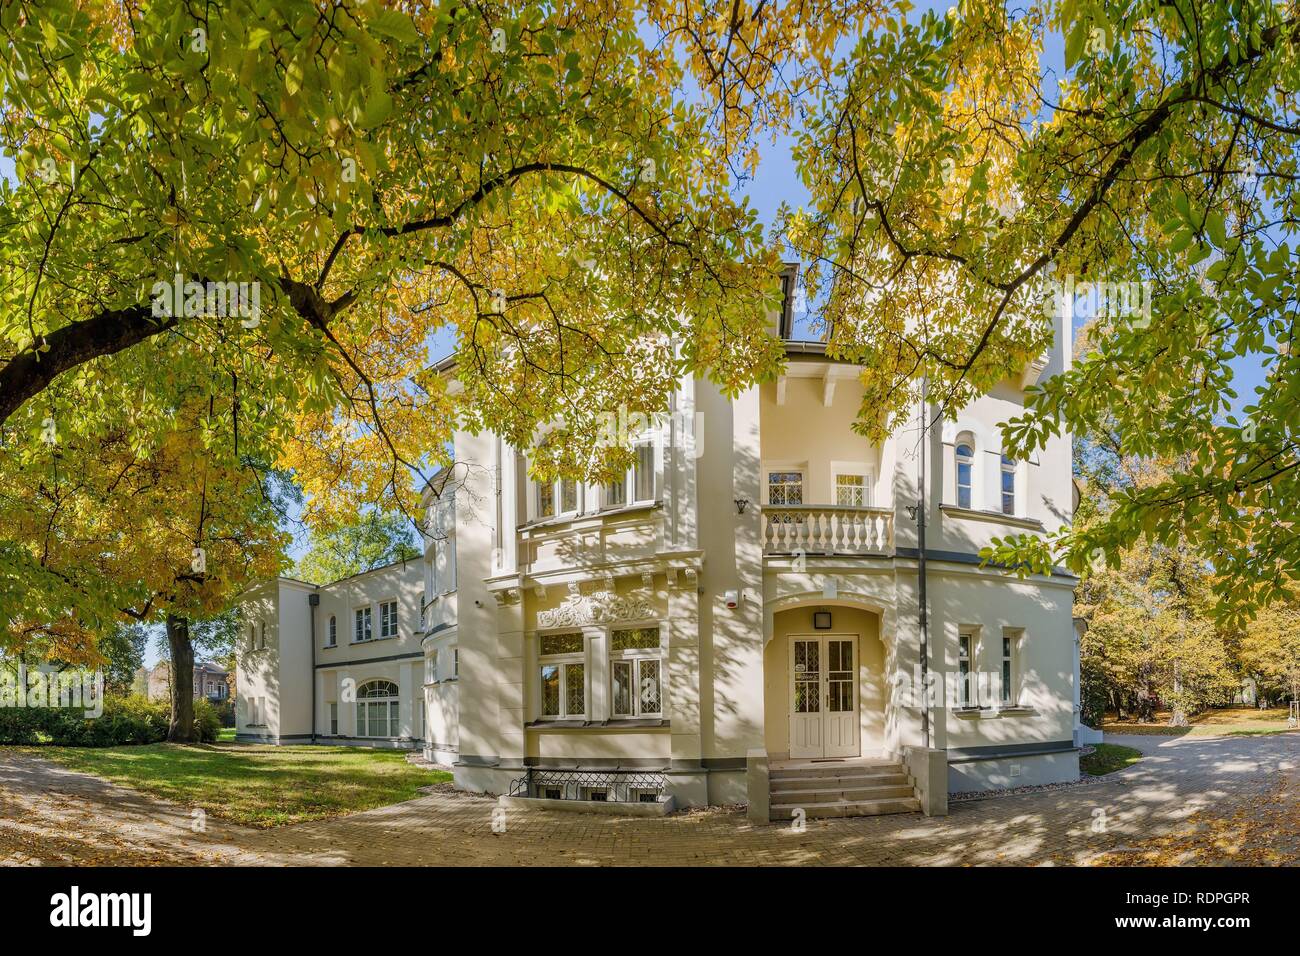 WARSAW, MAZOVIAN PROVINCE / POLAND - OCTOBER 12, 2018: 19th cent. eclectic Koelihen Palace in the Wlochy district. Stock Photo